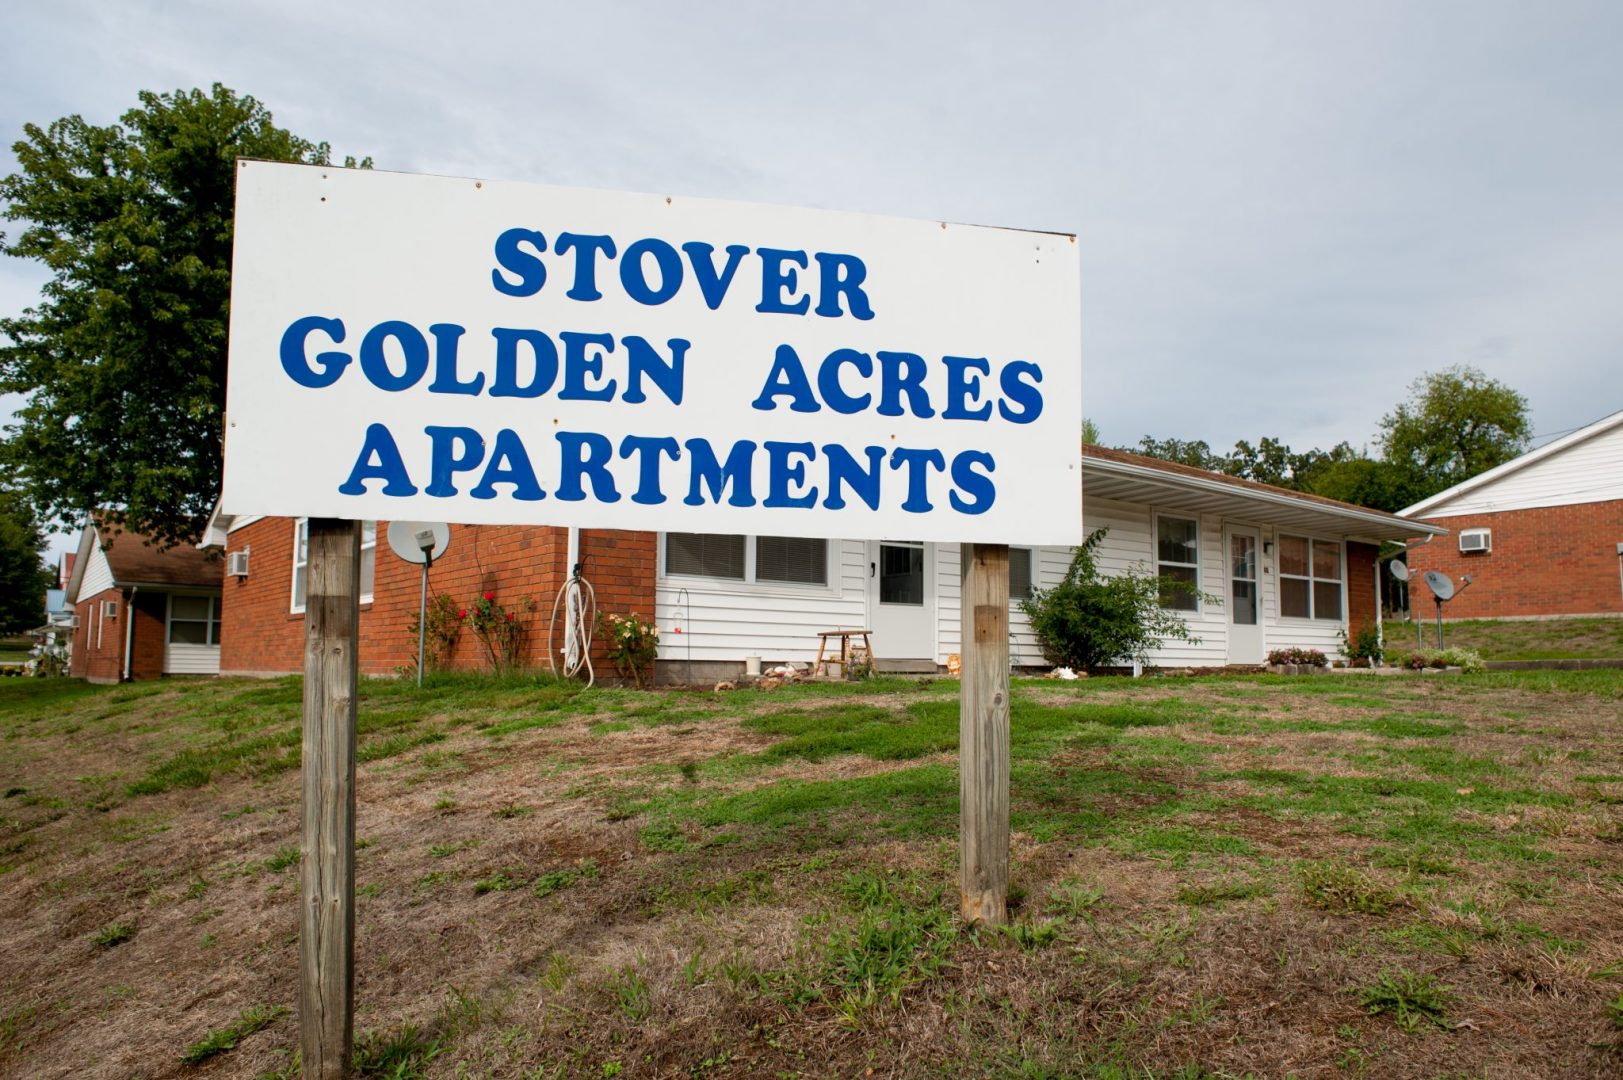 STOVER GOLDEN ACRES